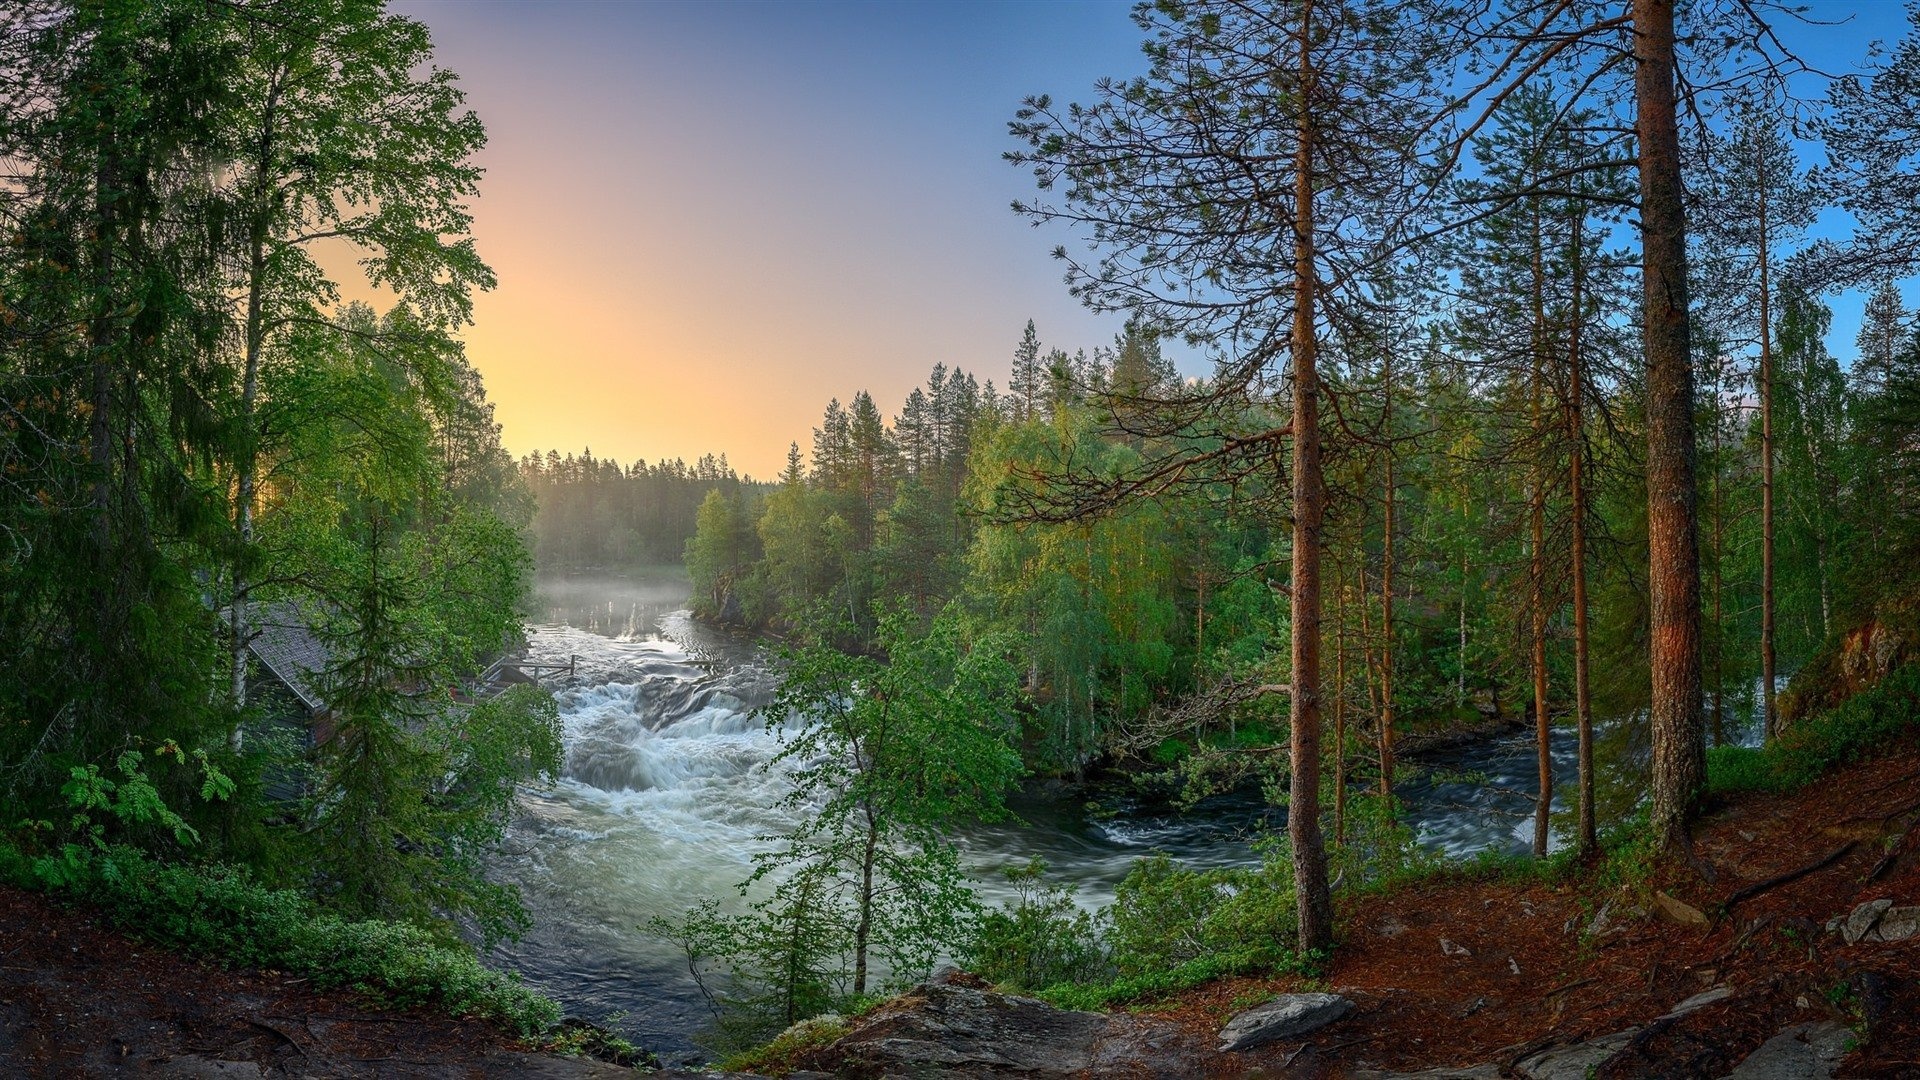 Finland: The country forms a symbolic northern border between western and eastern Europe. 1920x1080 Full HD Wallpaper.